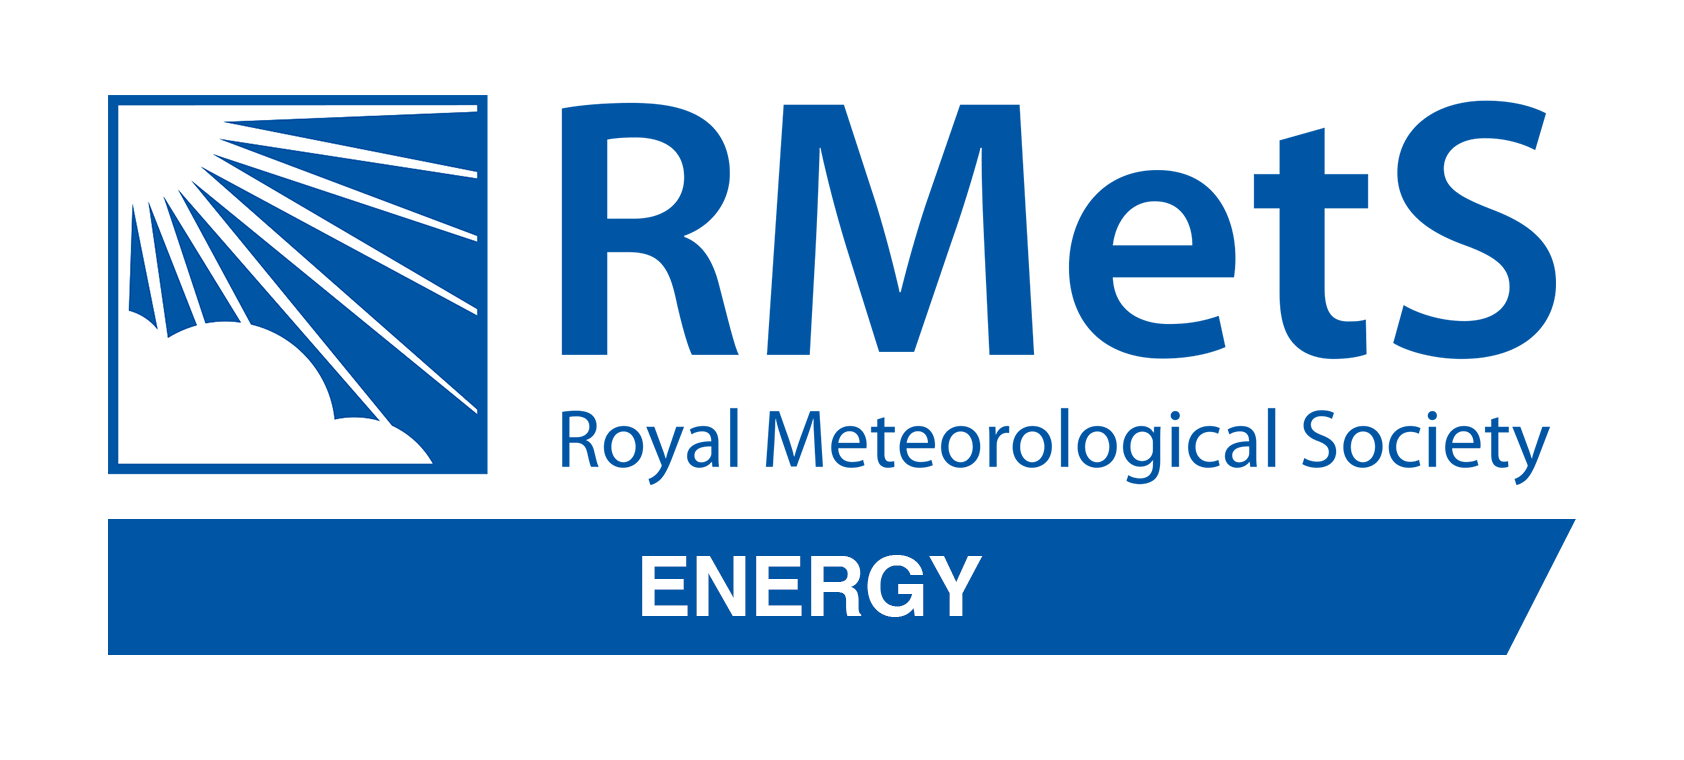 Royal Meteorological Society Energy Special Interest Group